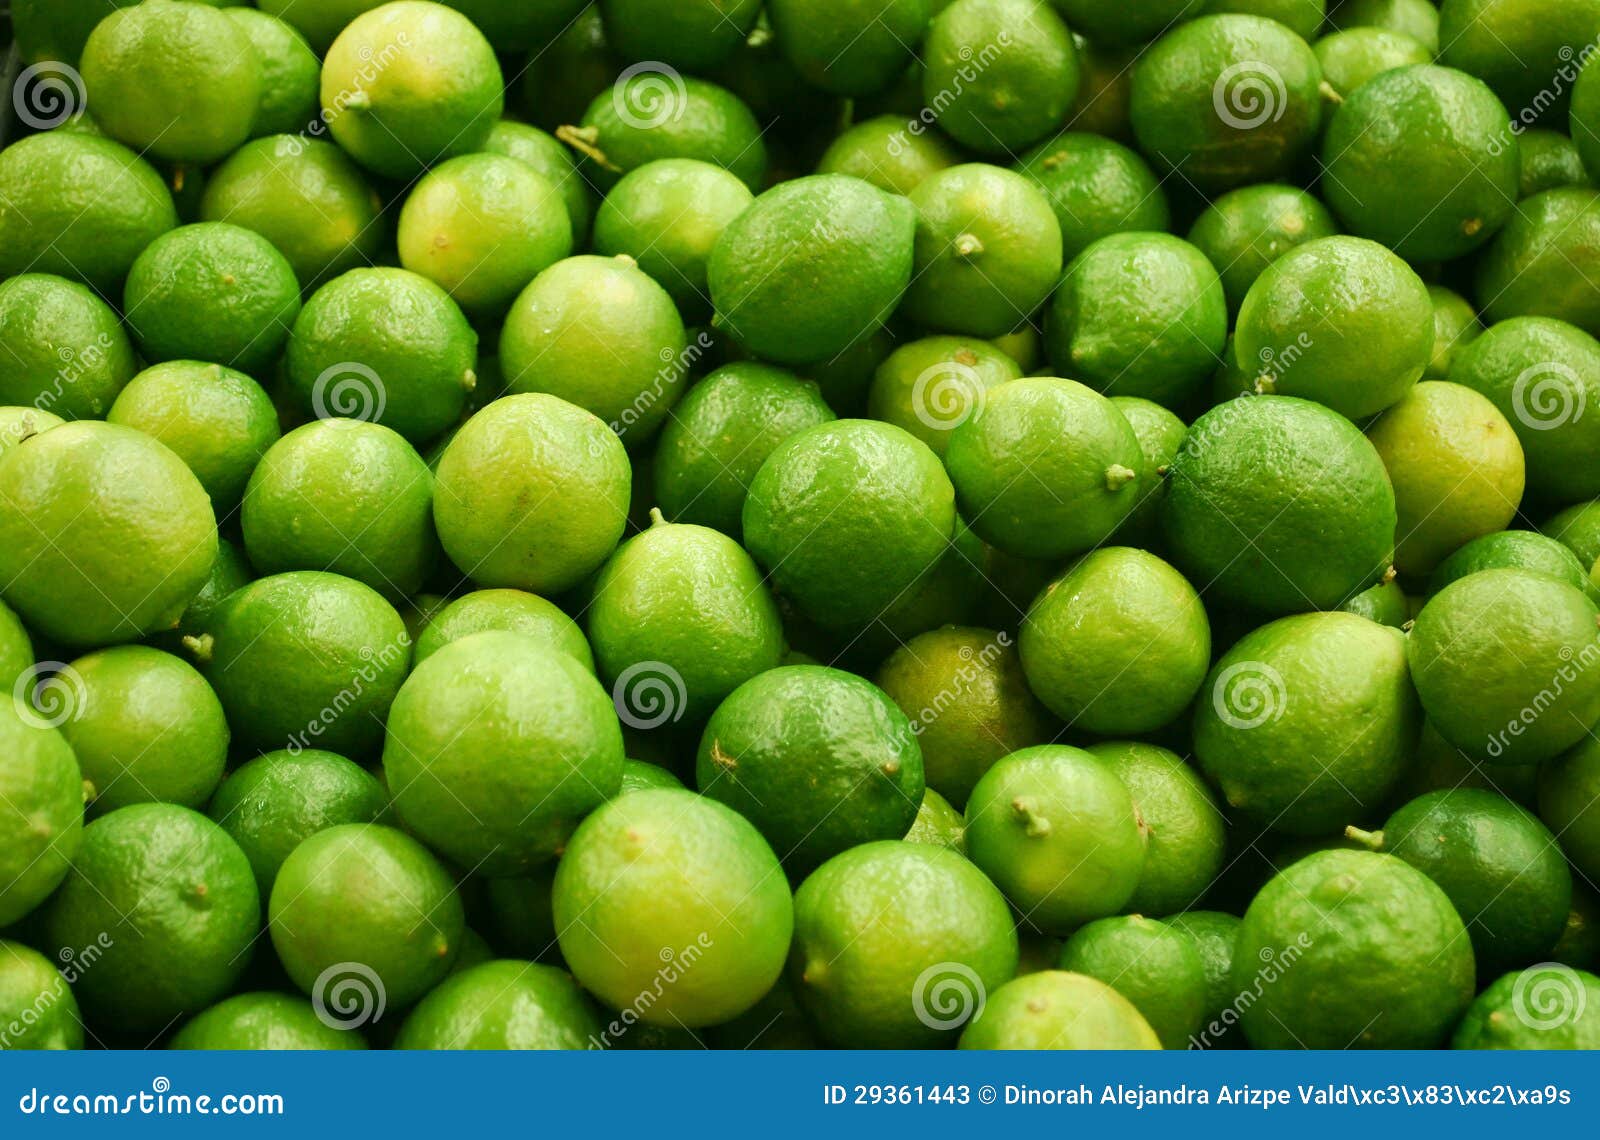 bunch of limes